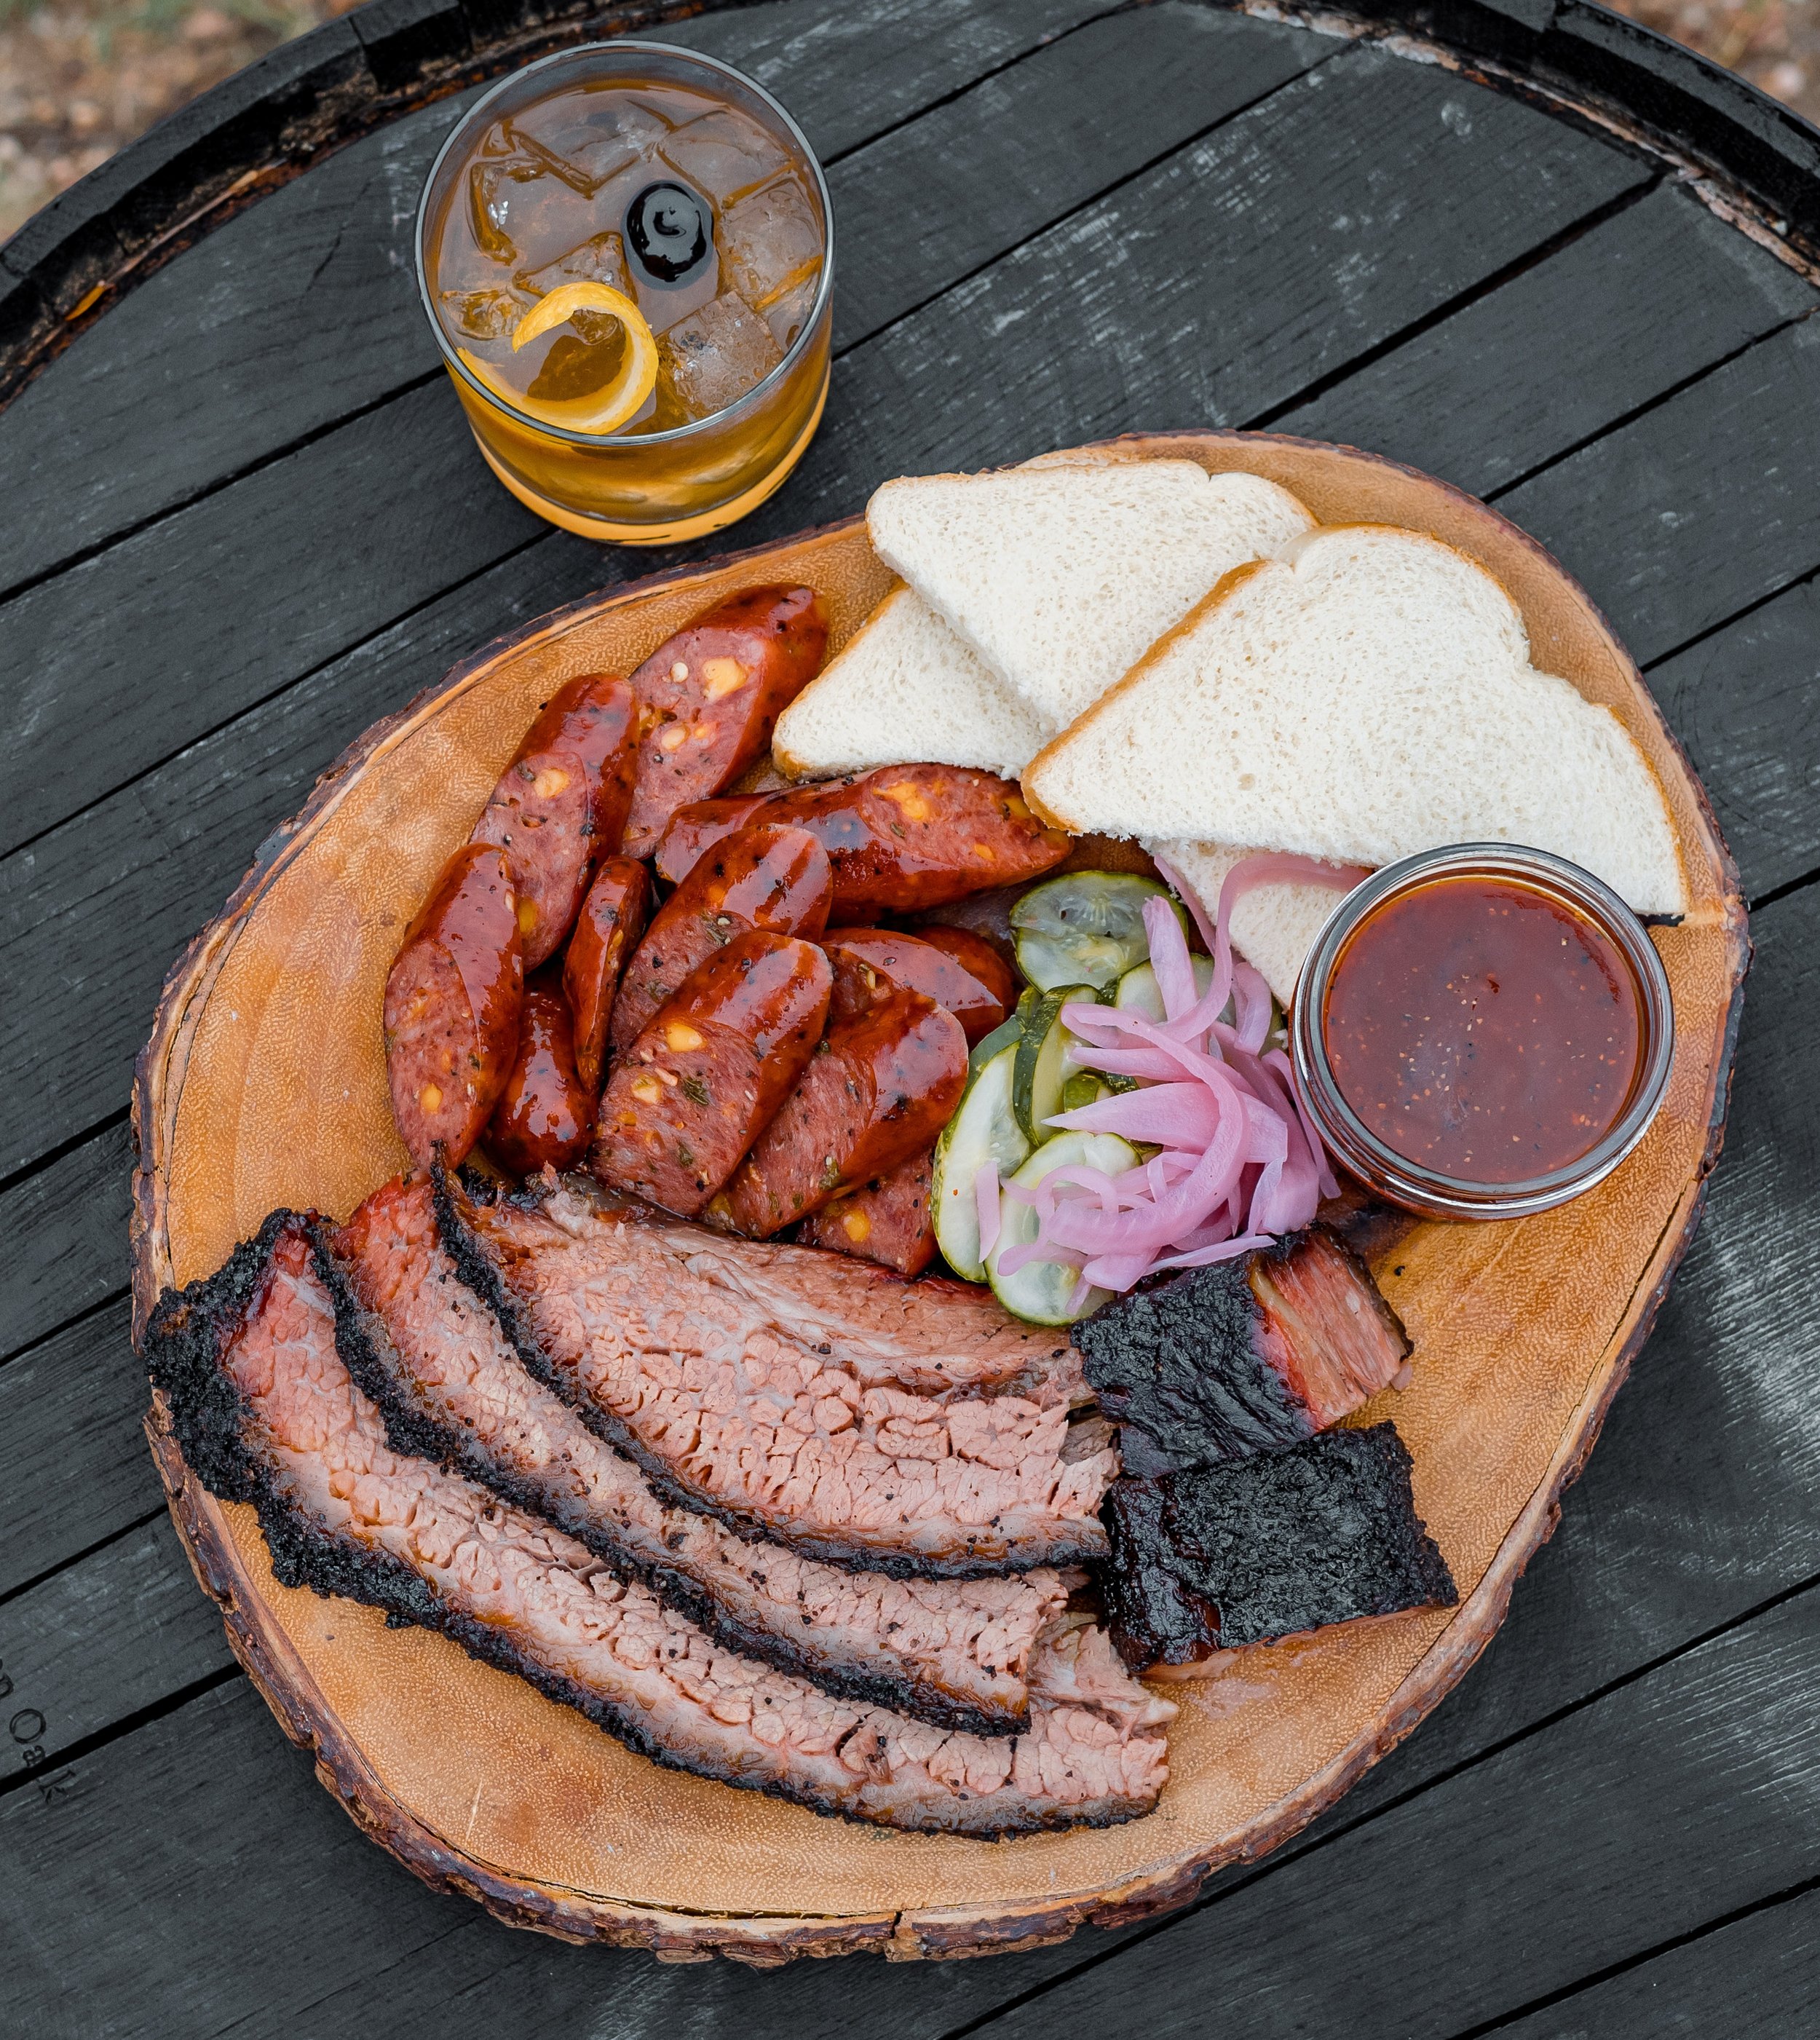 plate of brisket and sausage with bread and cocktail